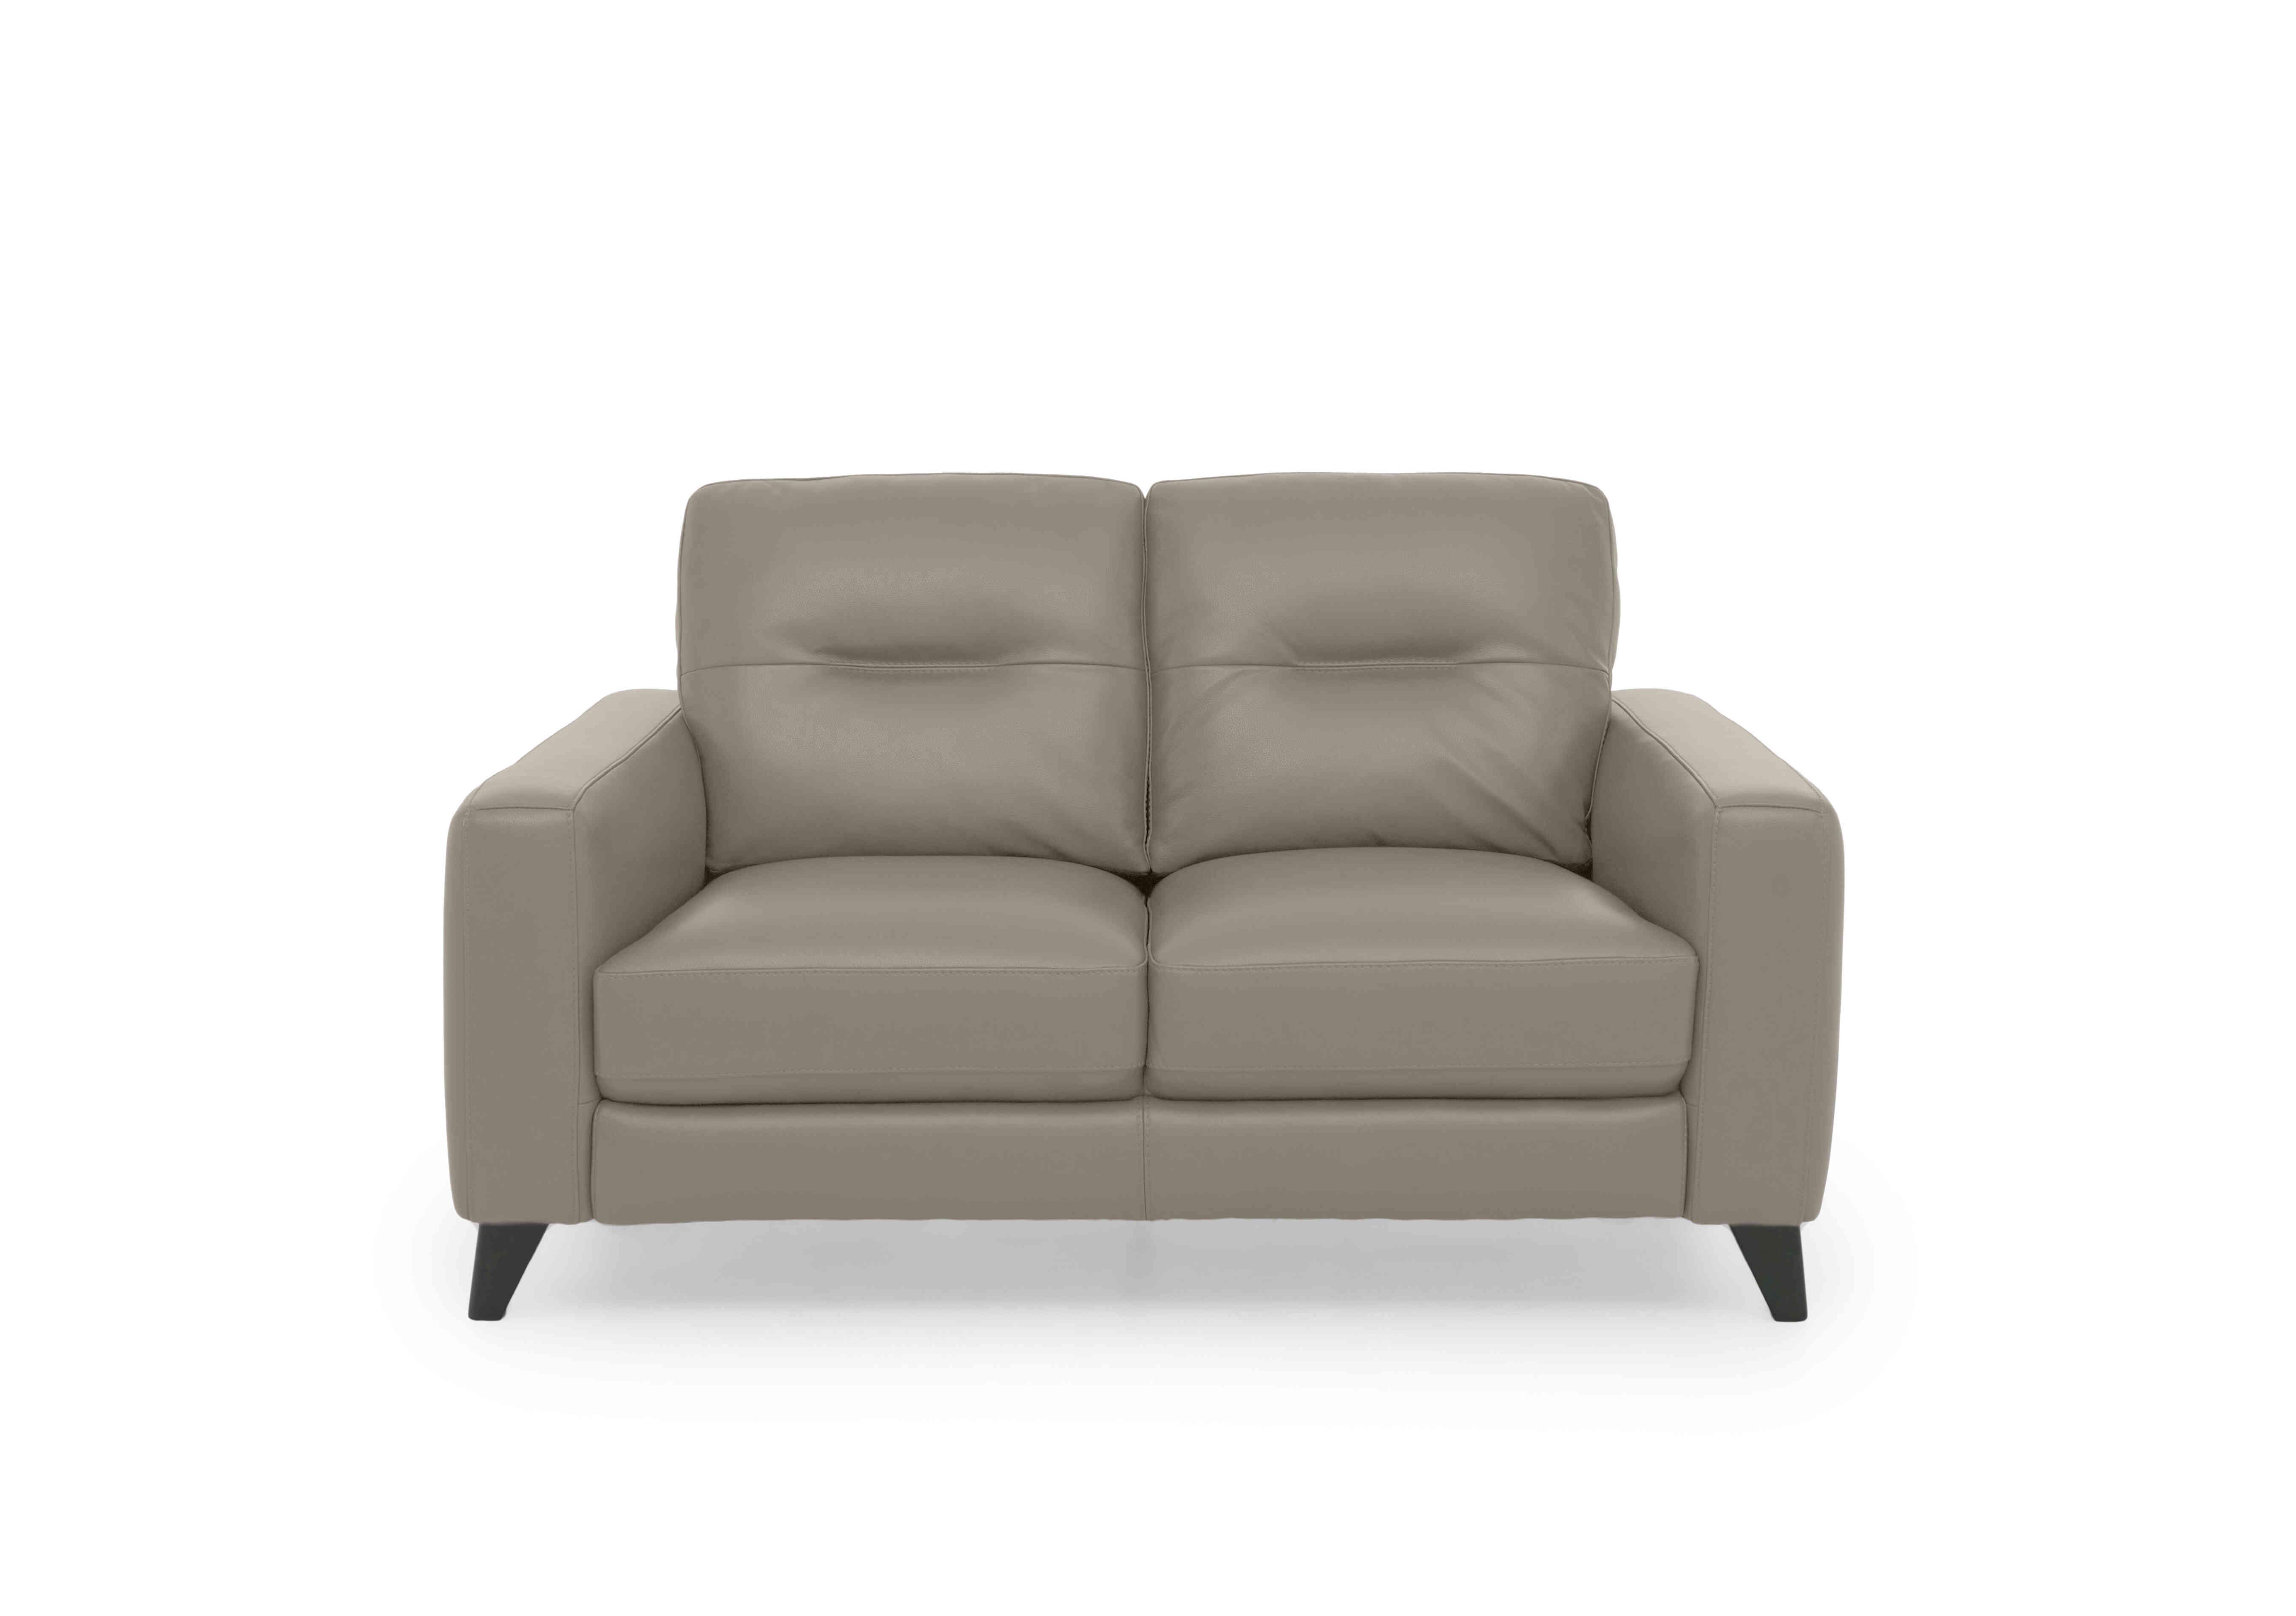 Jules 2 Seater Leather Sofa in An-946b Silver Grey on Furniture Village